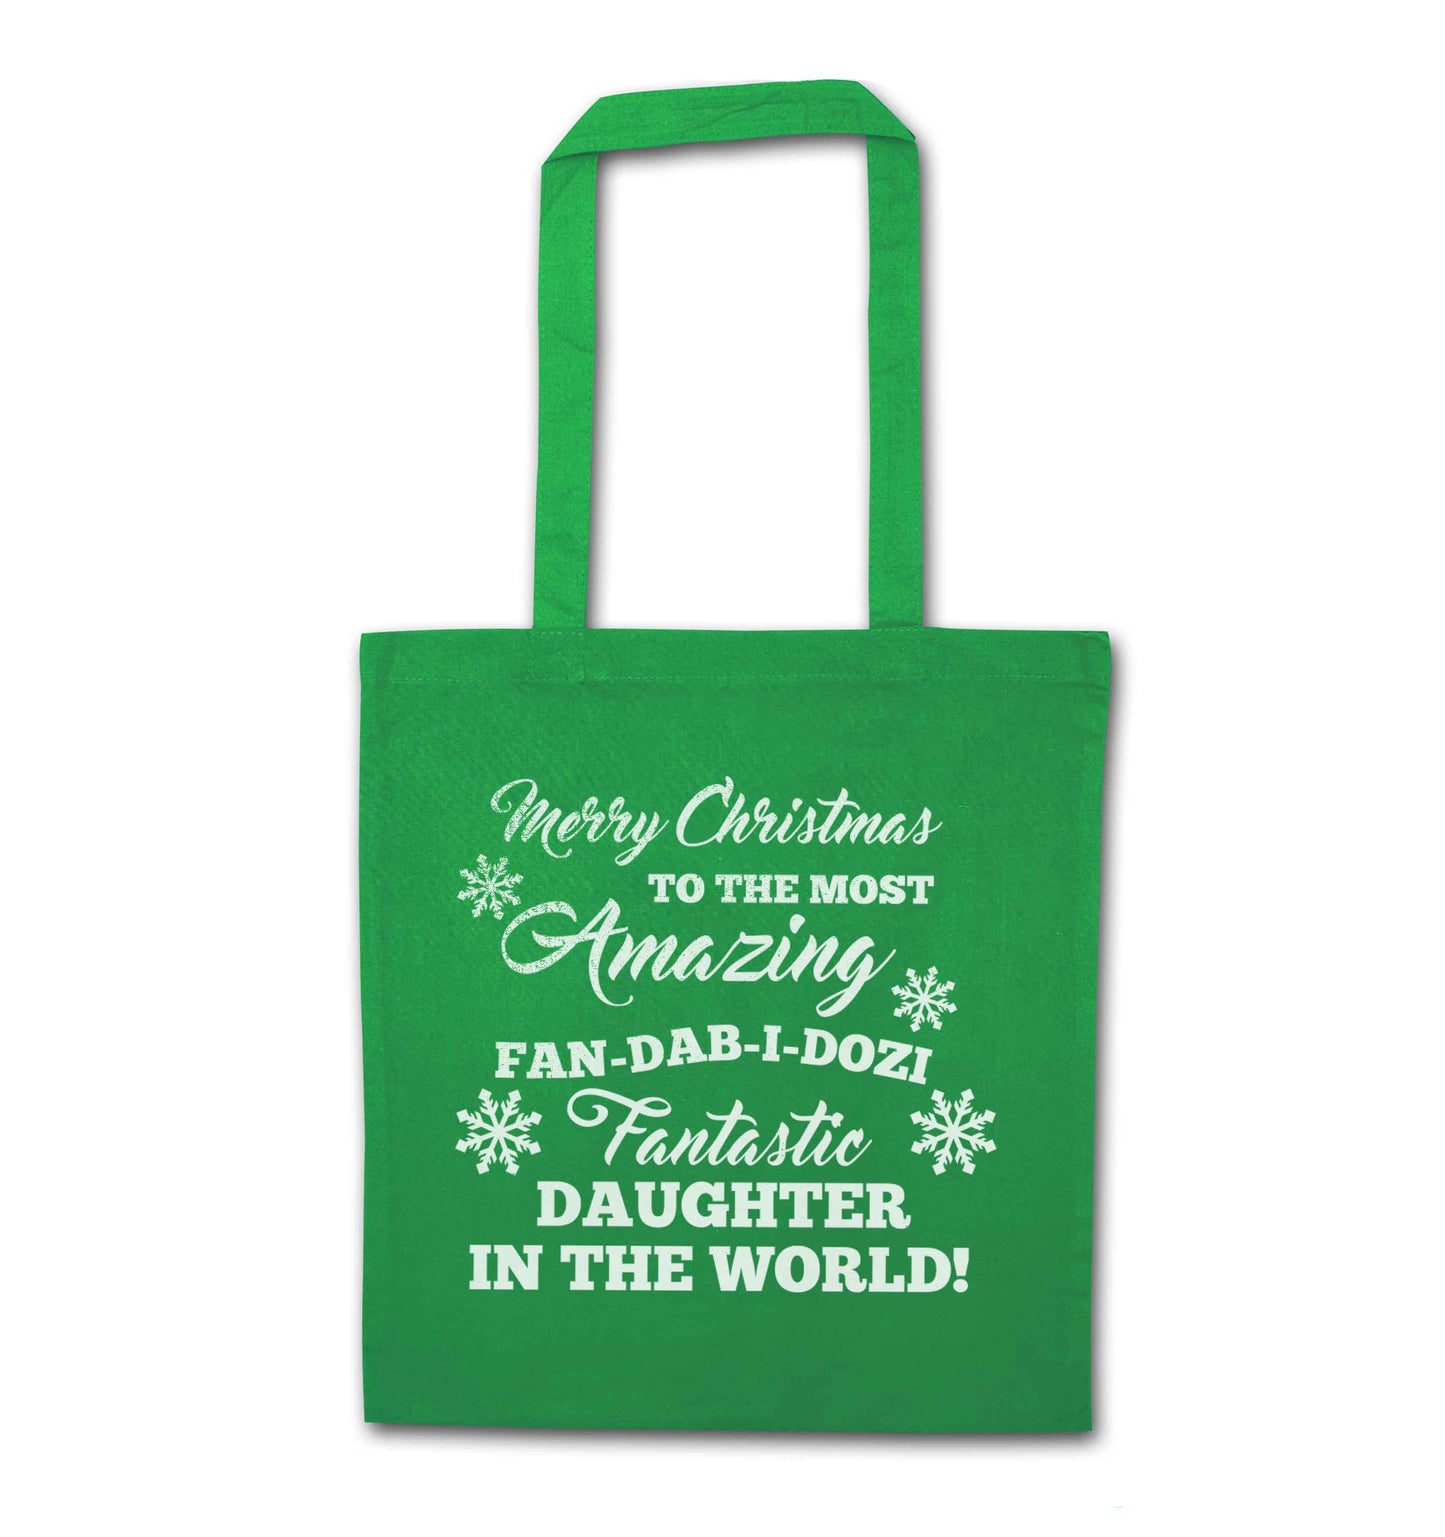 Merry Christmas to the most amazing fan-dab-i-dozi fantasic Daughter in the world green tote bag